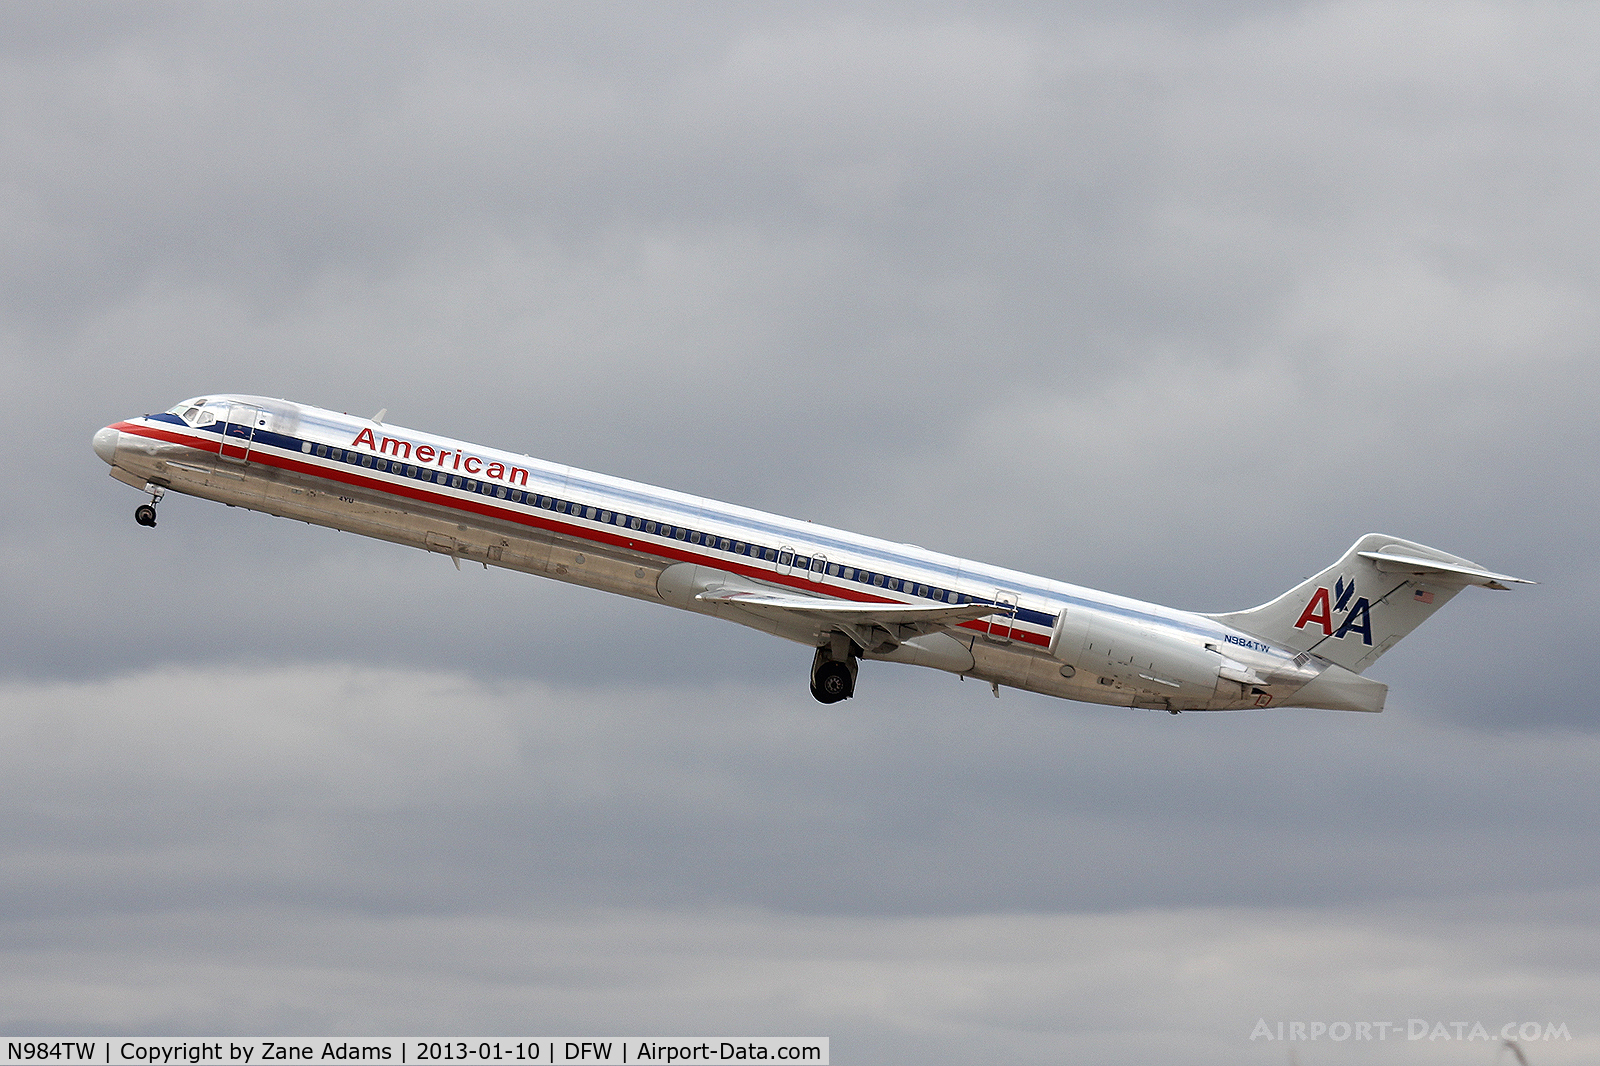 N984TW, 1999 McDonnell Douglas MD-83 (DC-9-83) C/N 53634, American Airlines at DFW Airport